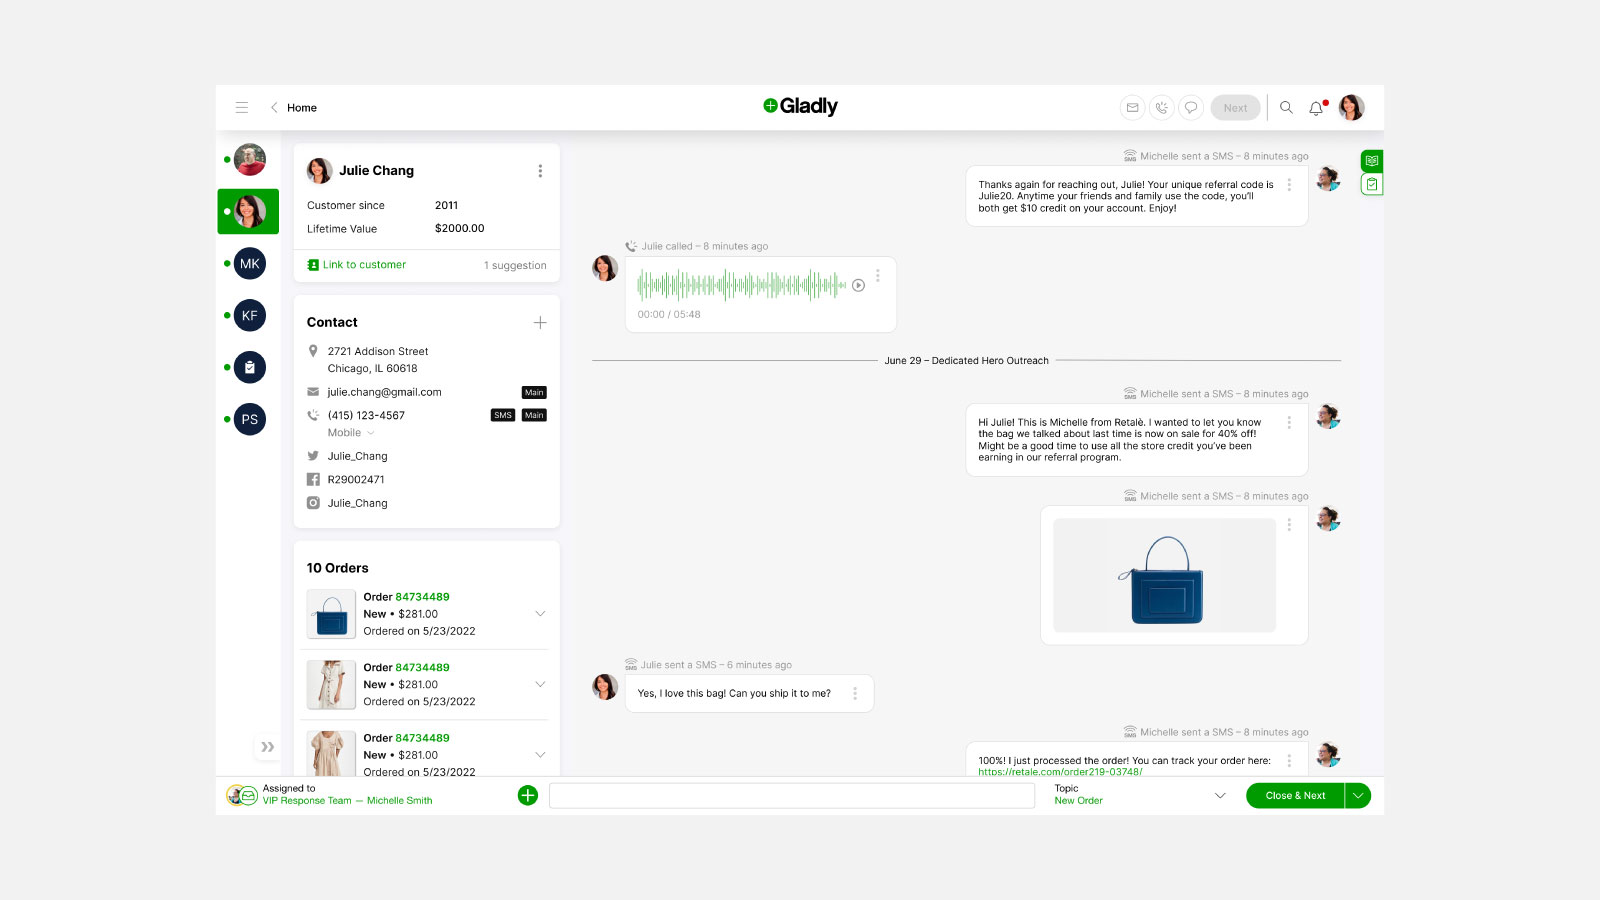 Full Customer View with a Single Conversation Timeline